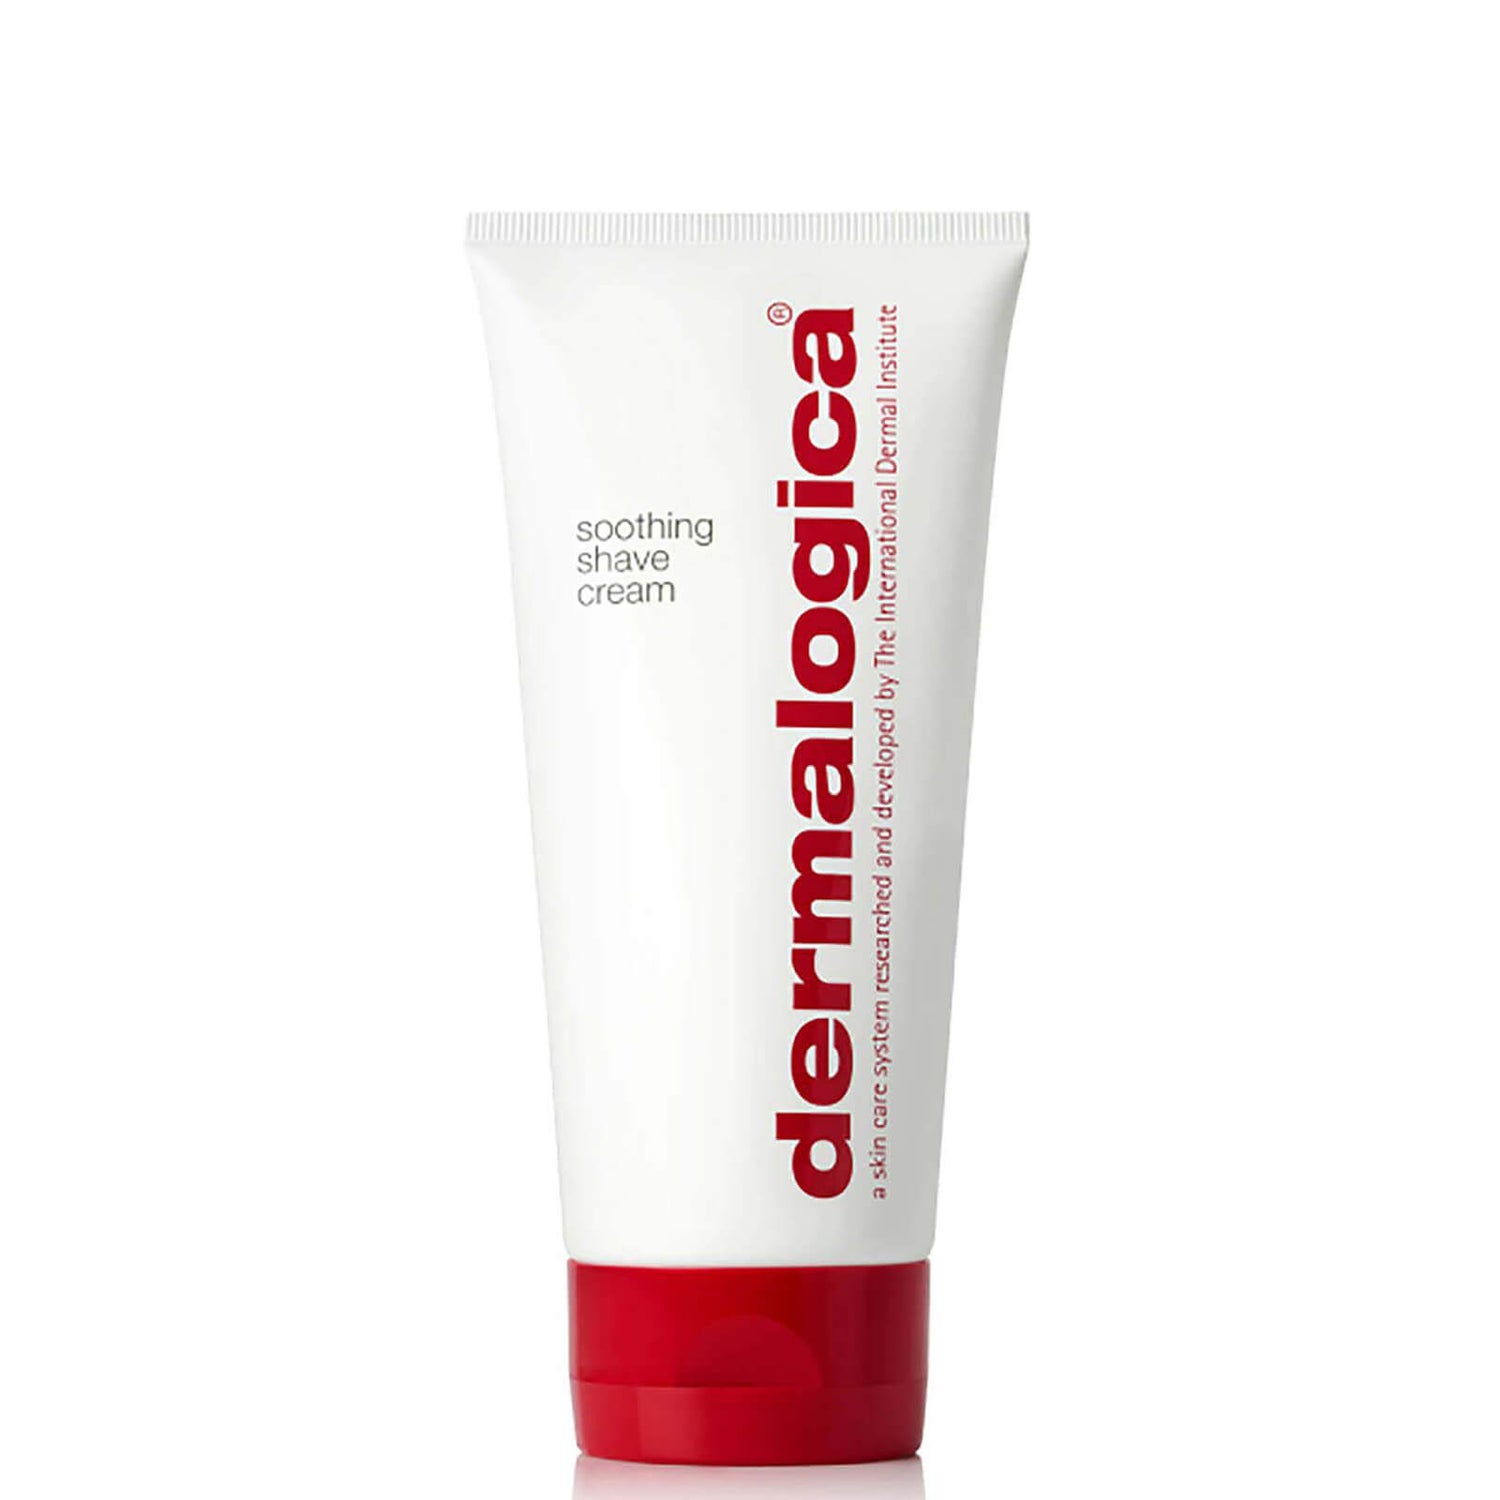 Dermalogica Soothing Shave Cream (180ml)